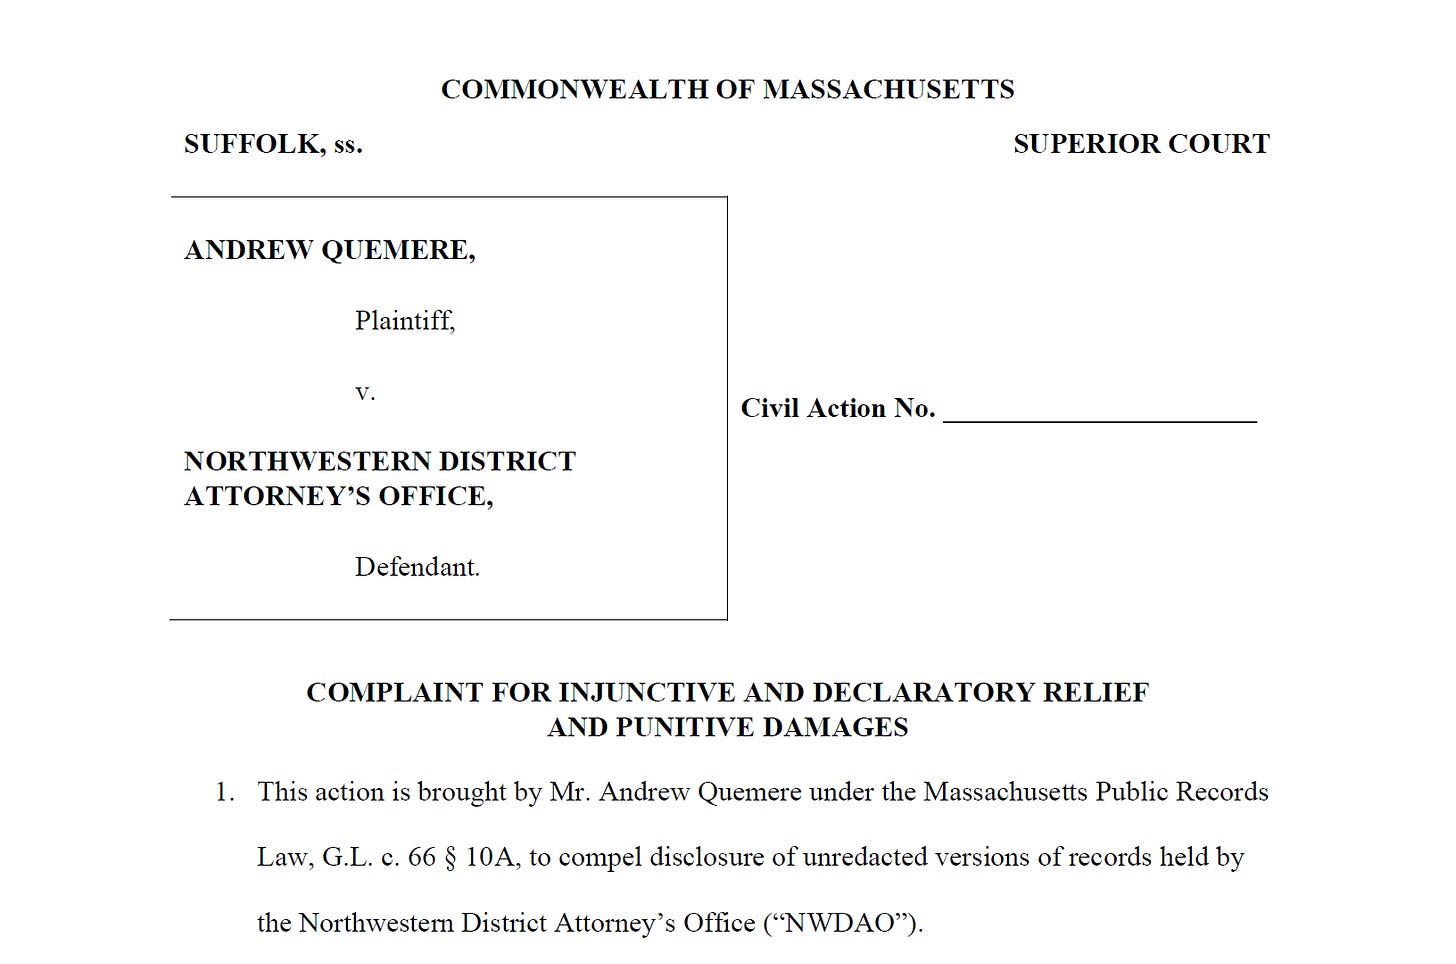 A screenshot of the top of the first page of the complaint against the Northwestern District Attorney's Office.